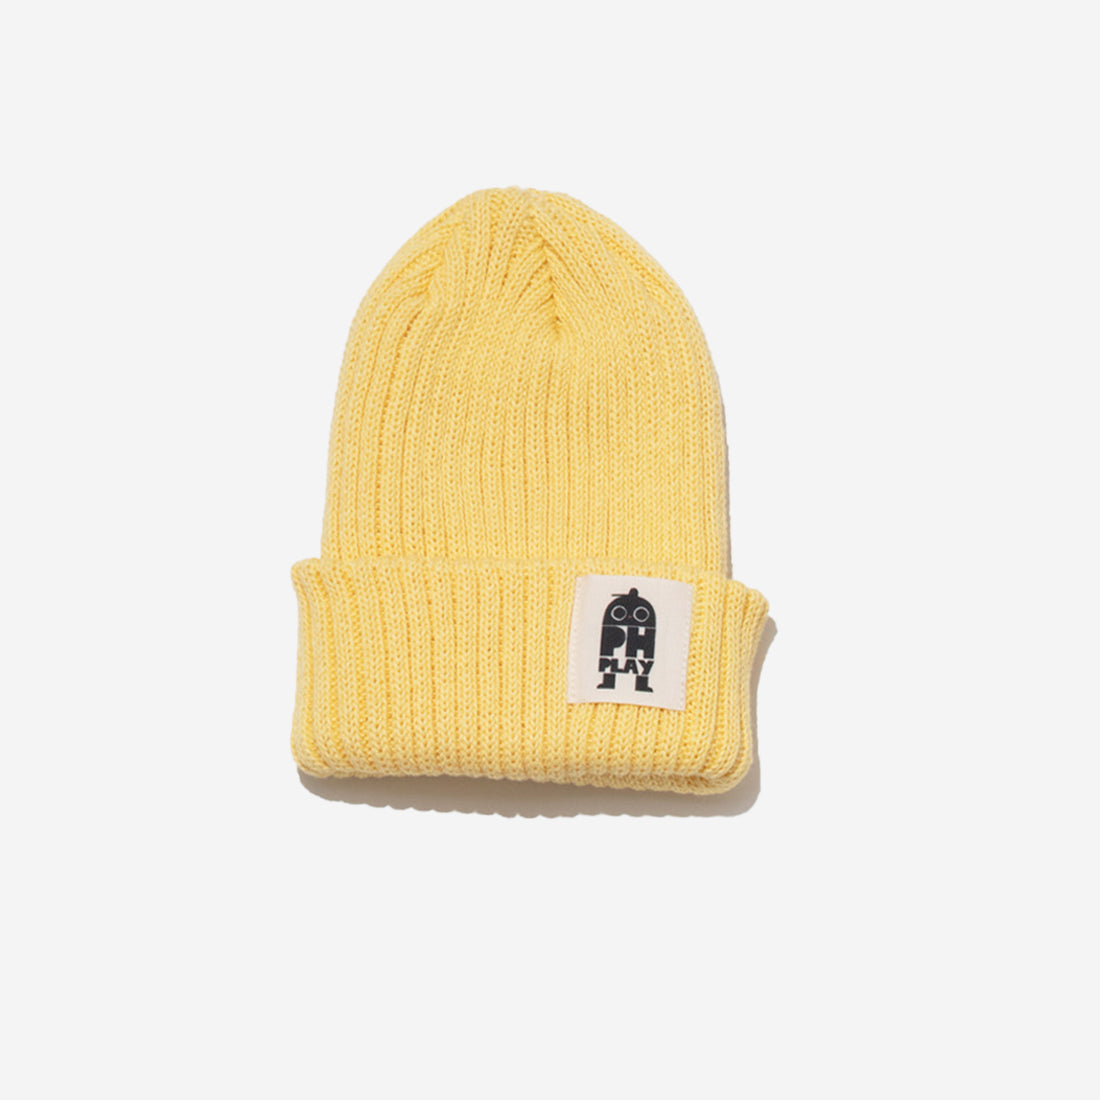 knitted yellow hat with black ph play logo on white background